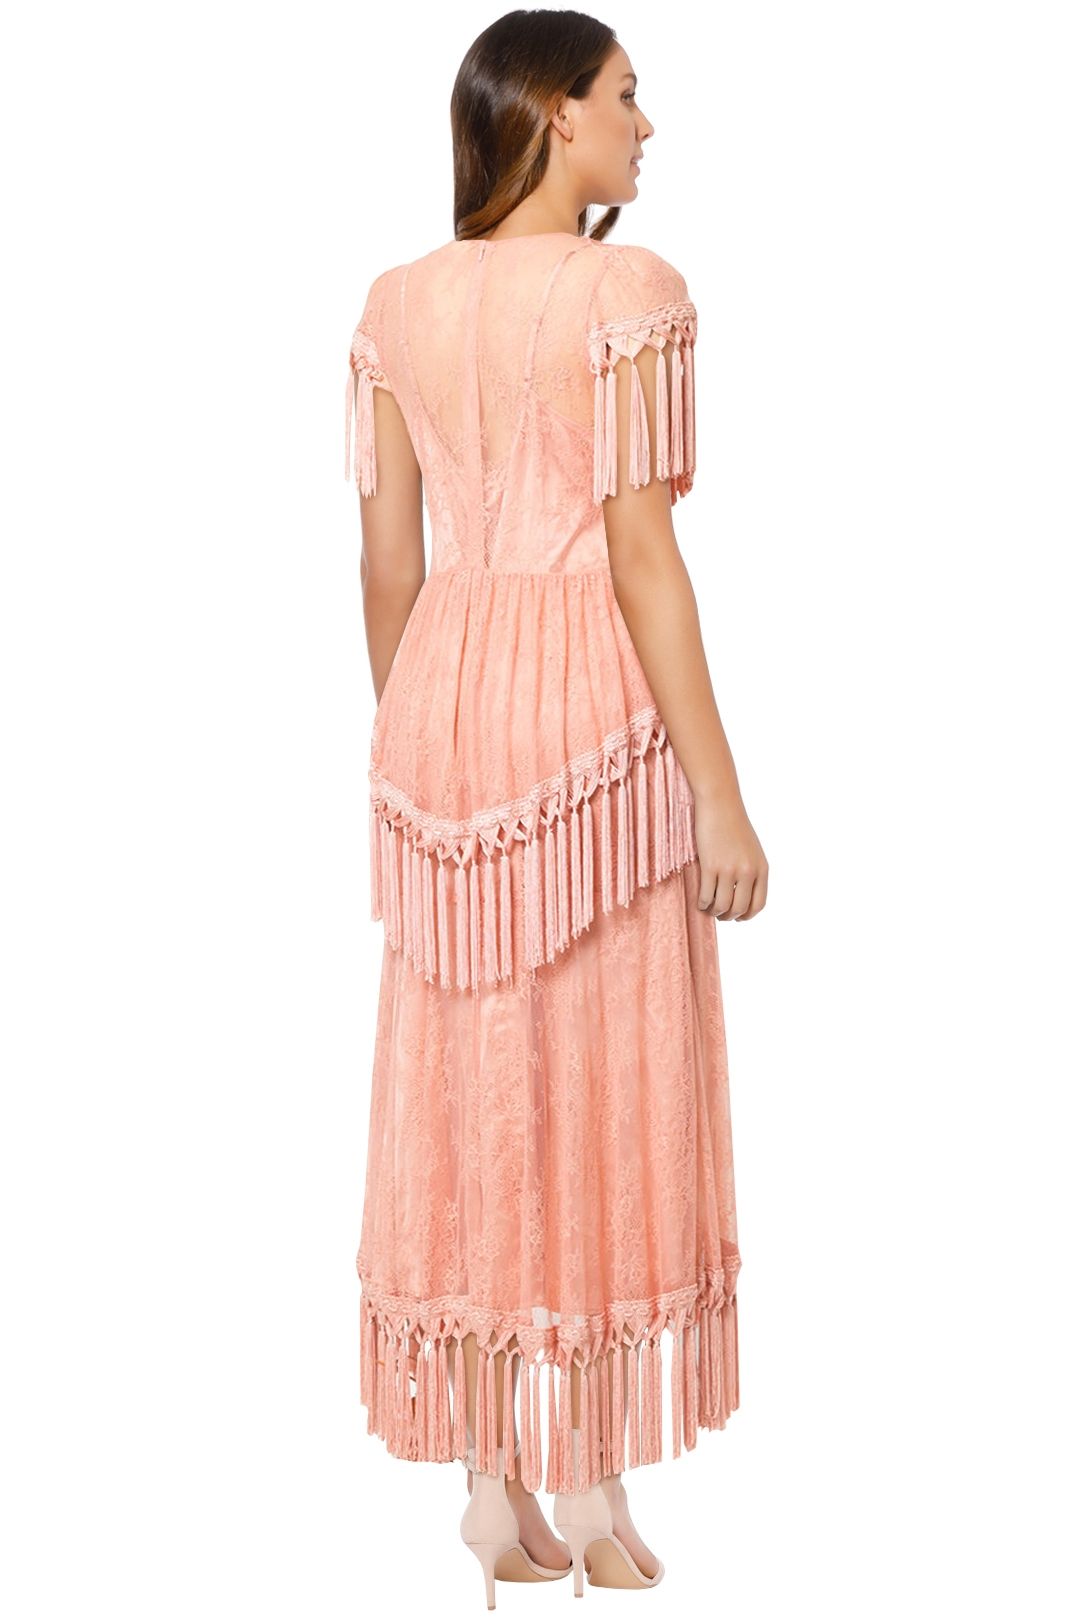 Alice McCall - More Than A Woman Gown - Dusty Rose - Back